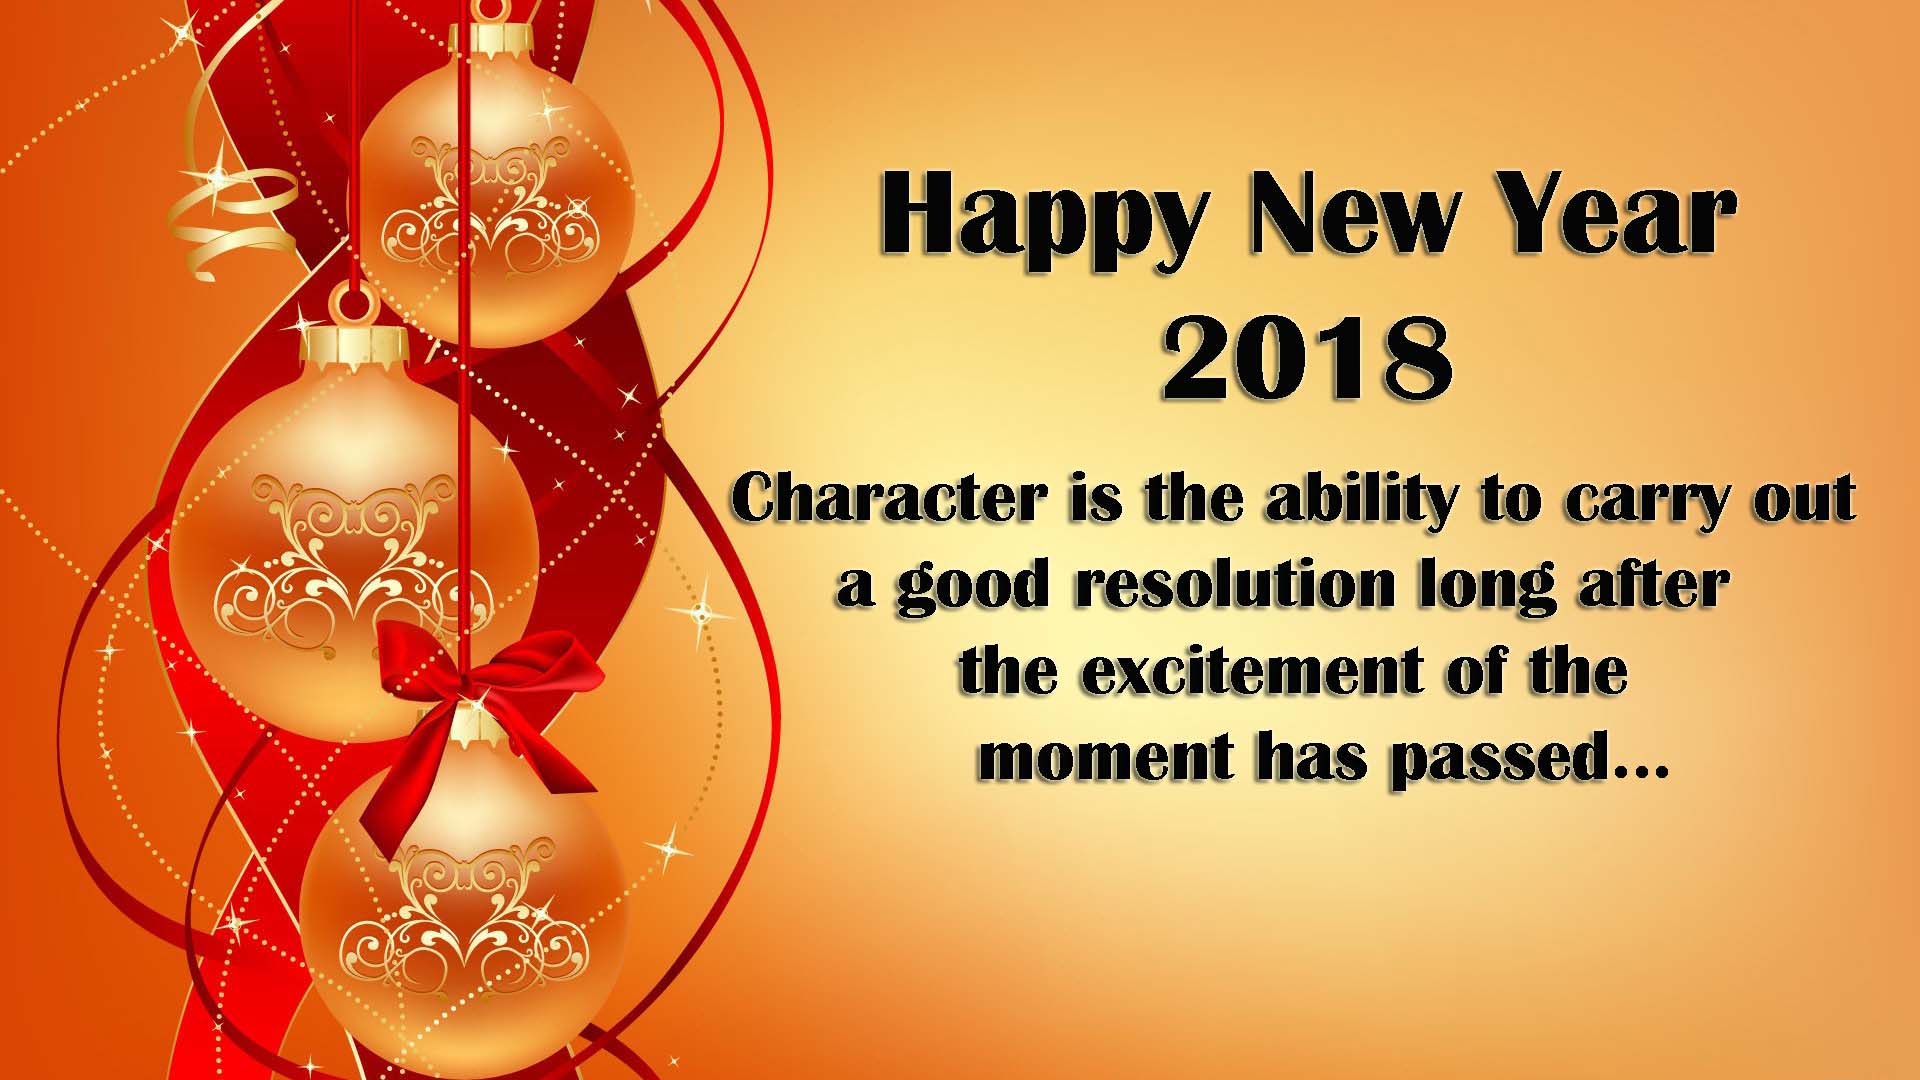 happy-new-year-2018-wallpapers-images-wishes-cards